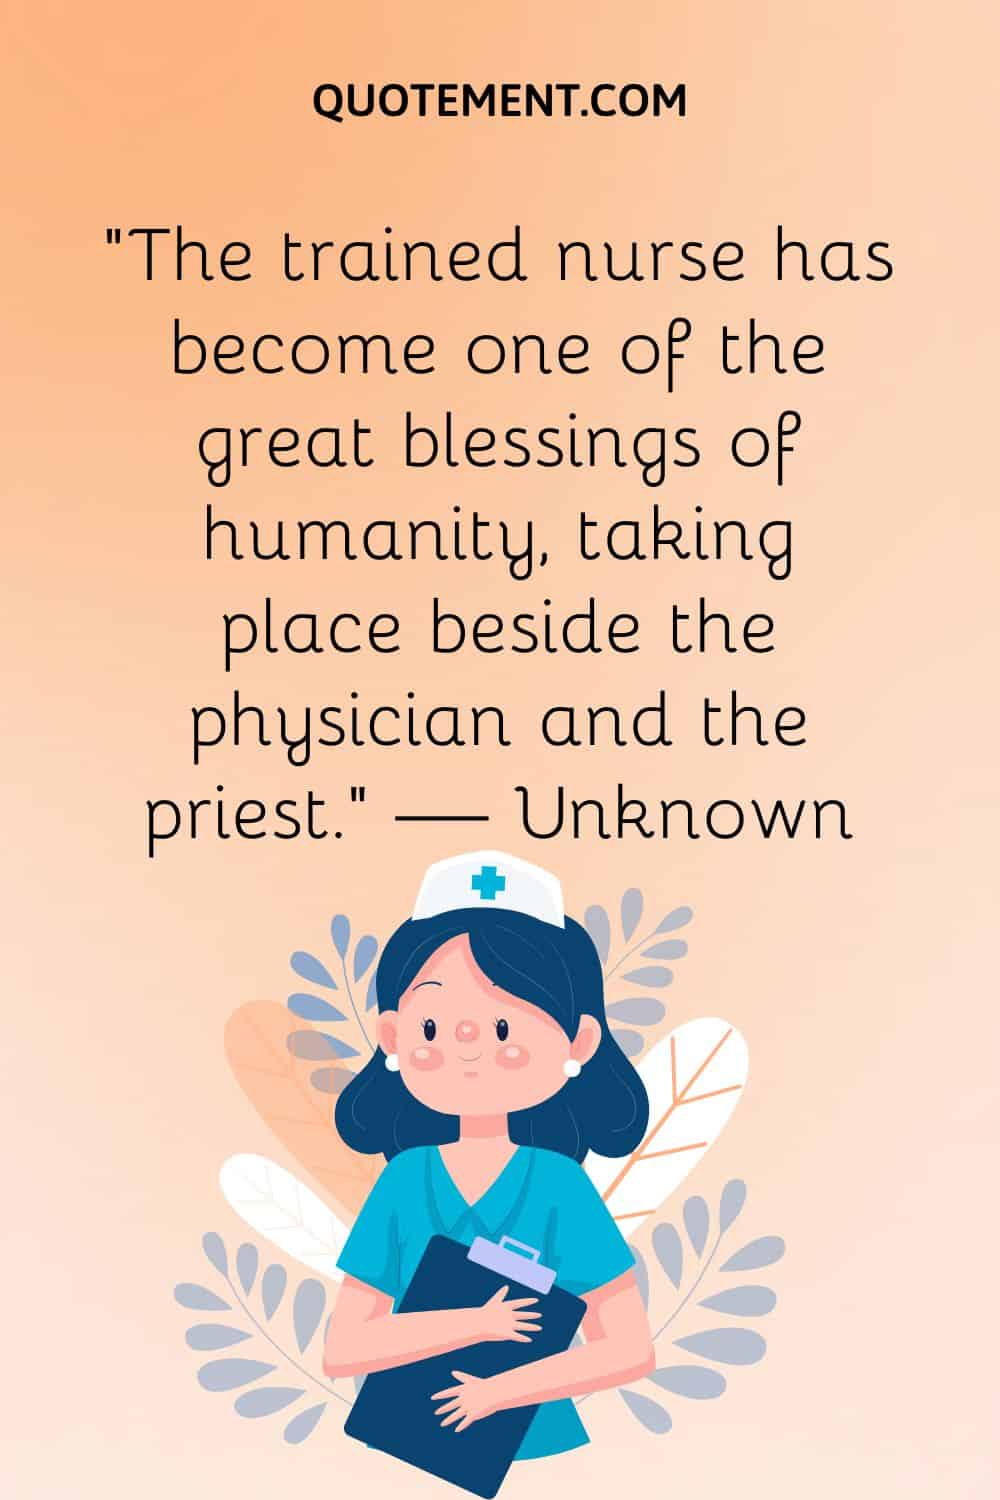 “The trained nurse has become one of the great blessings of humanity, taking place beside the physician and the priest.” — Unknown